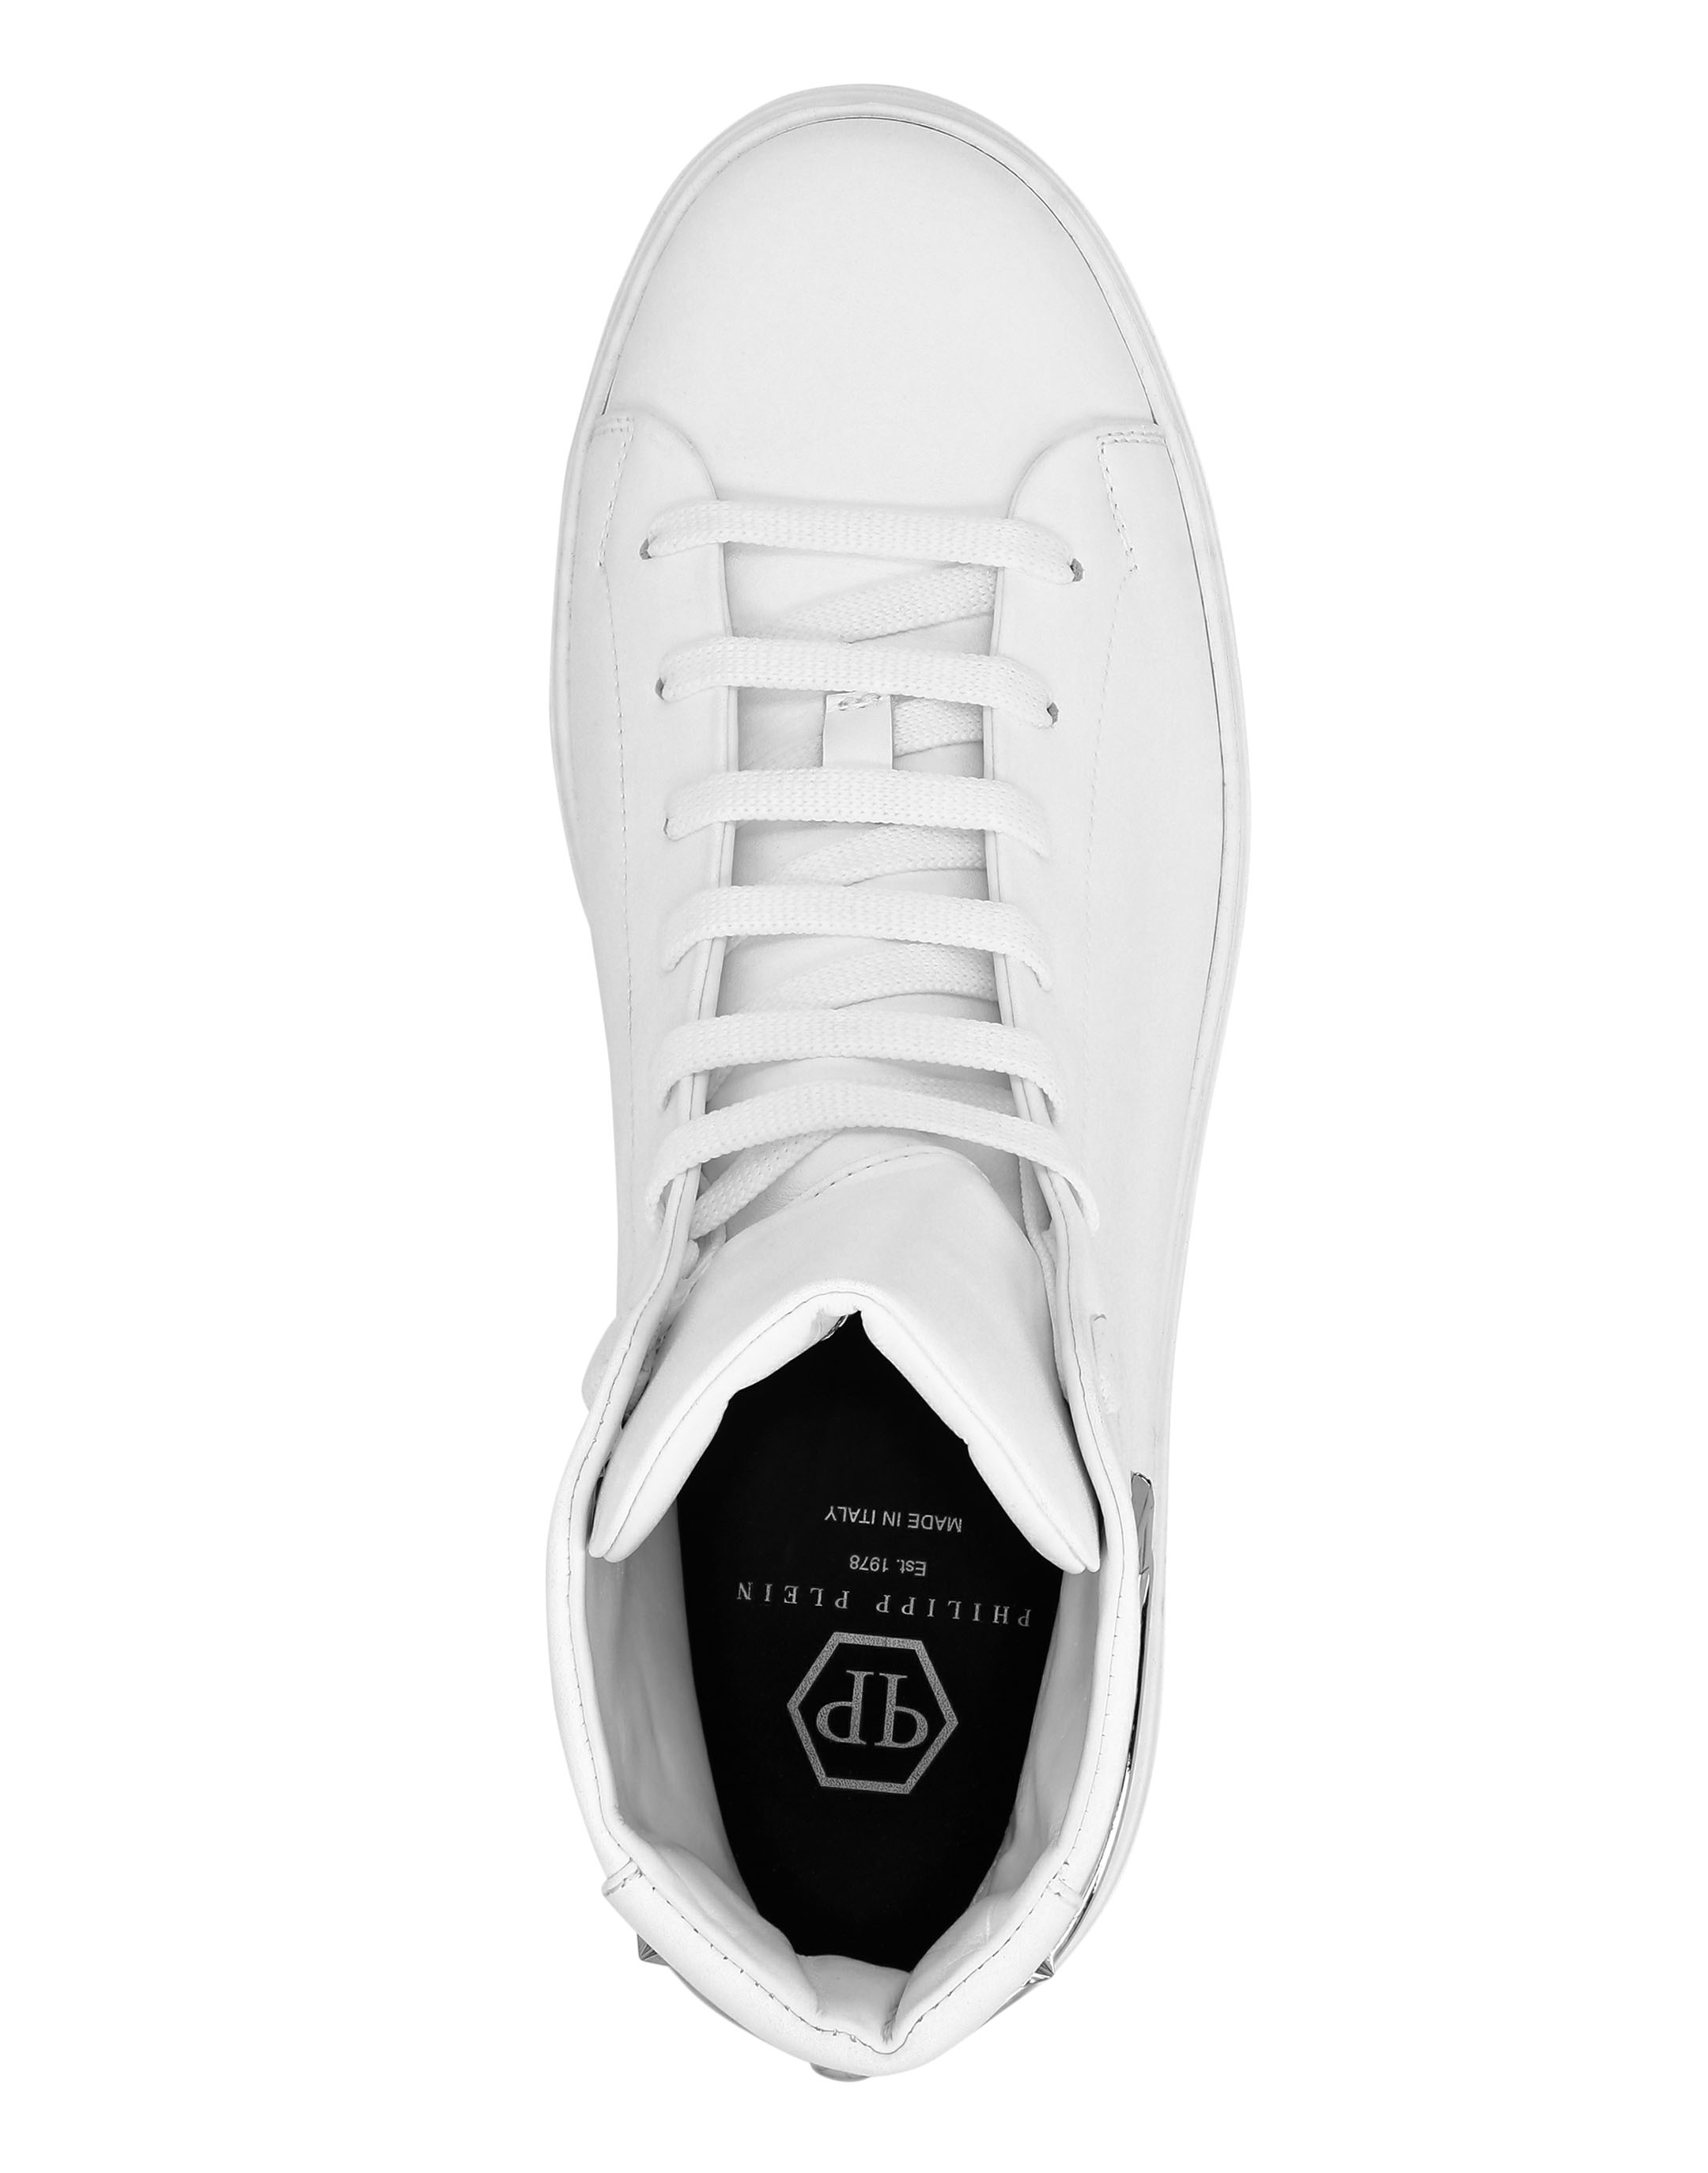 Hi-Top Sneakers Hexagon Stars and skull | Philipp Plein Outlet